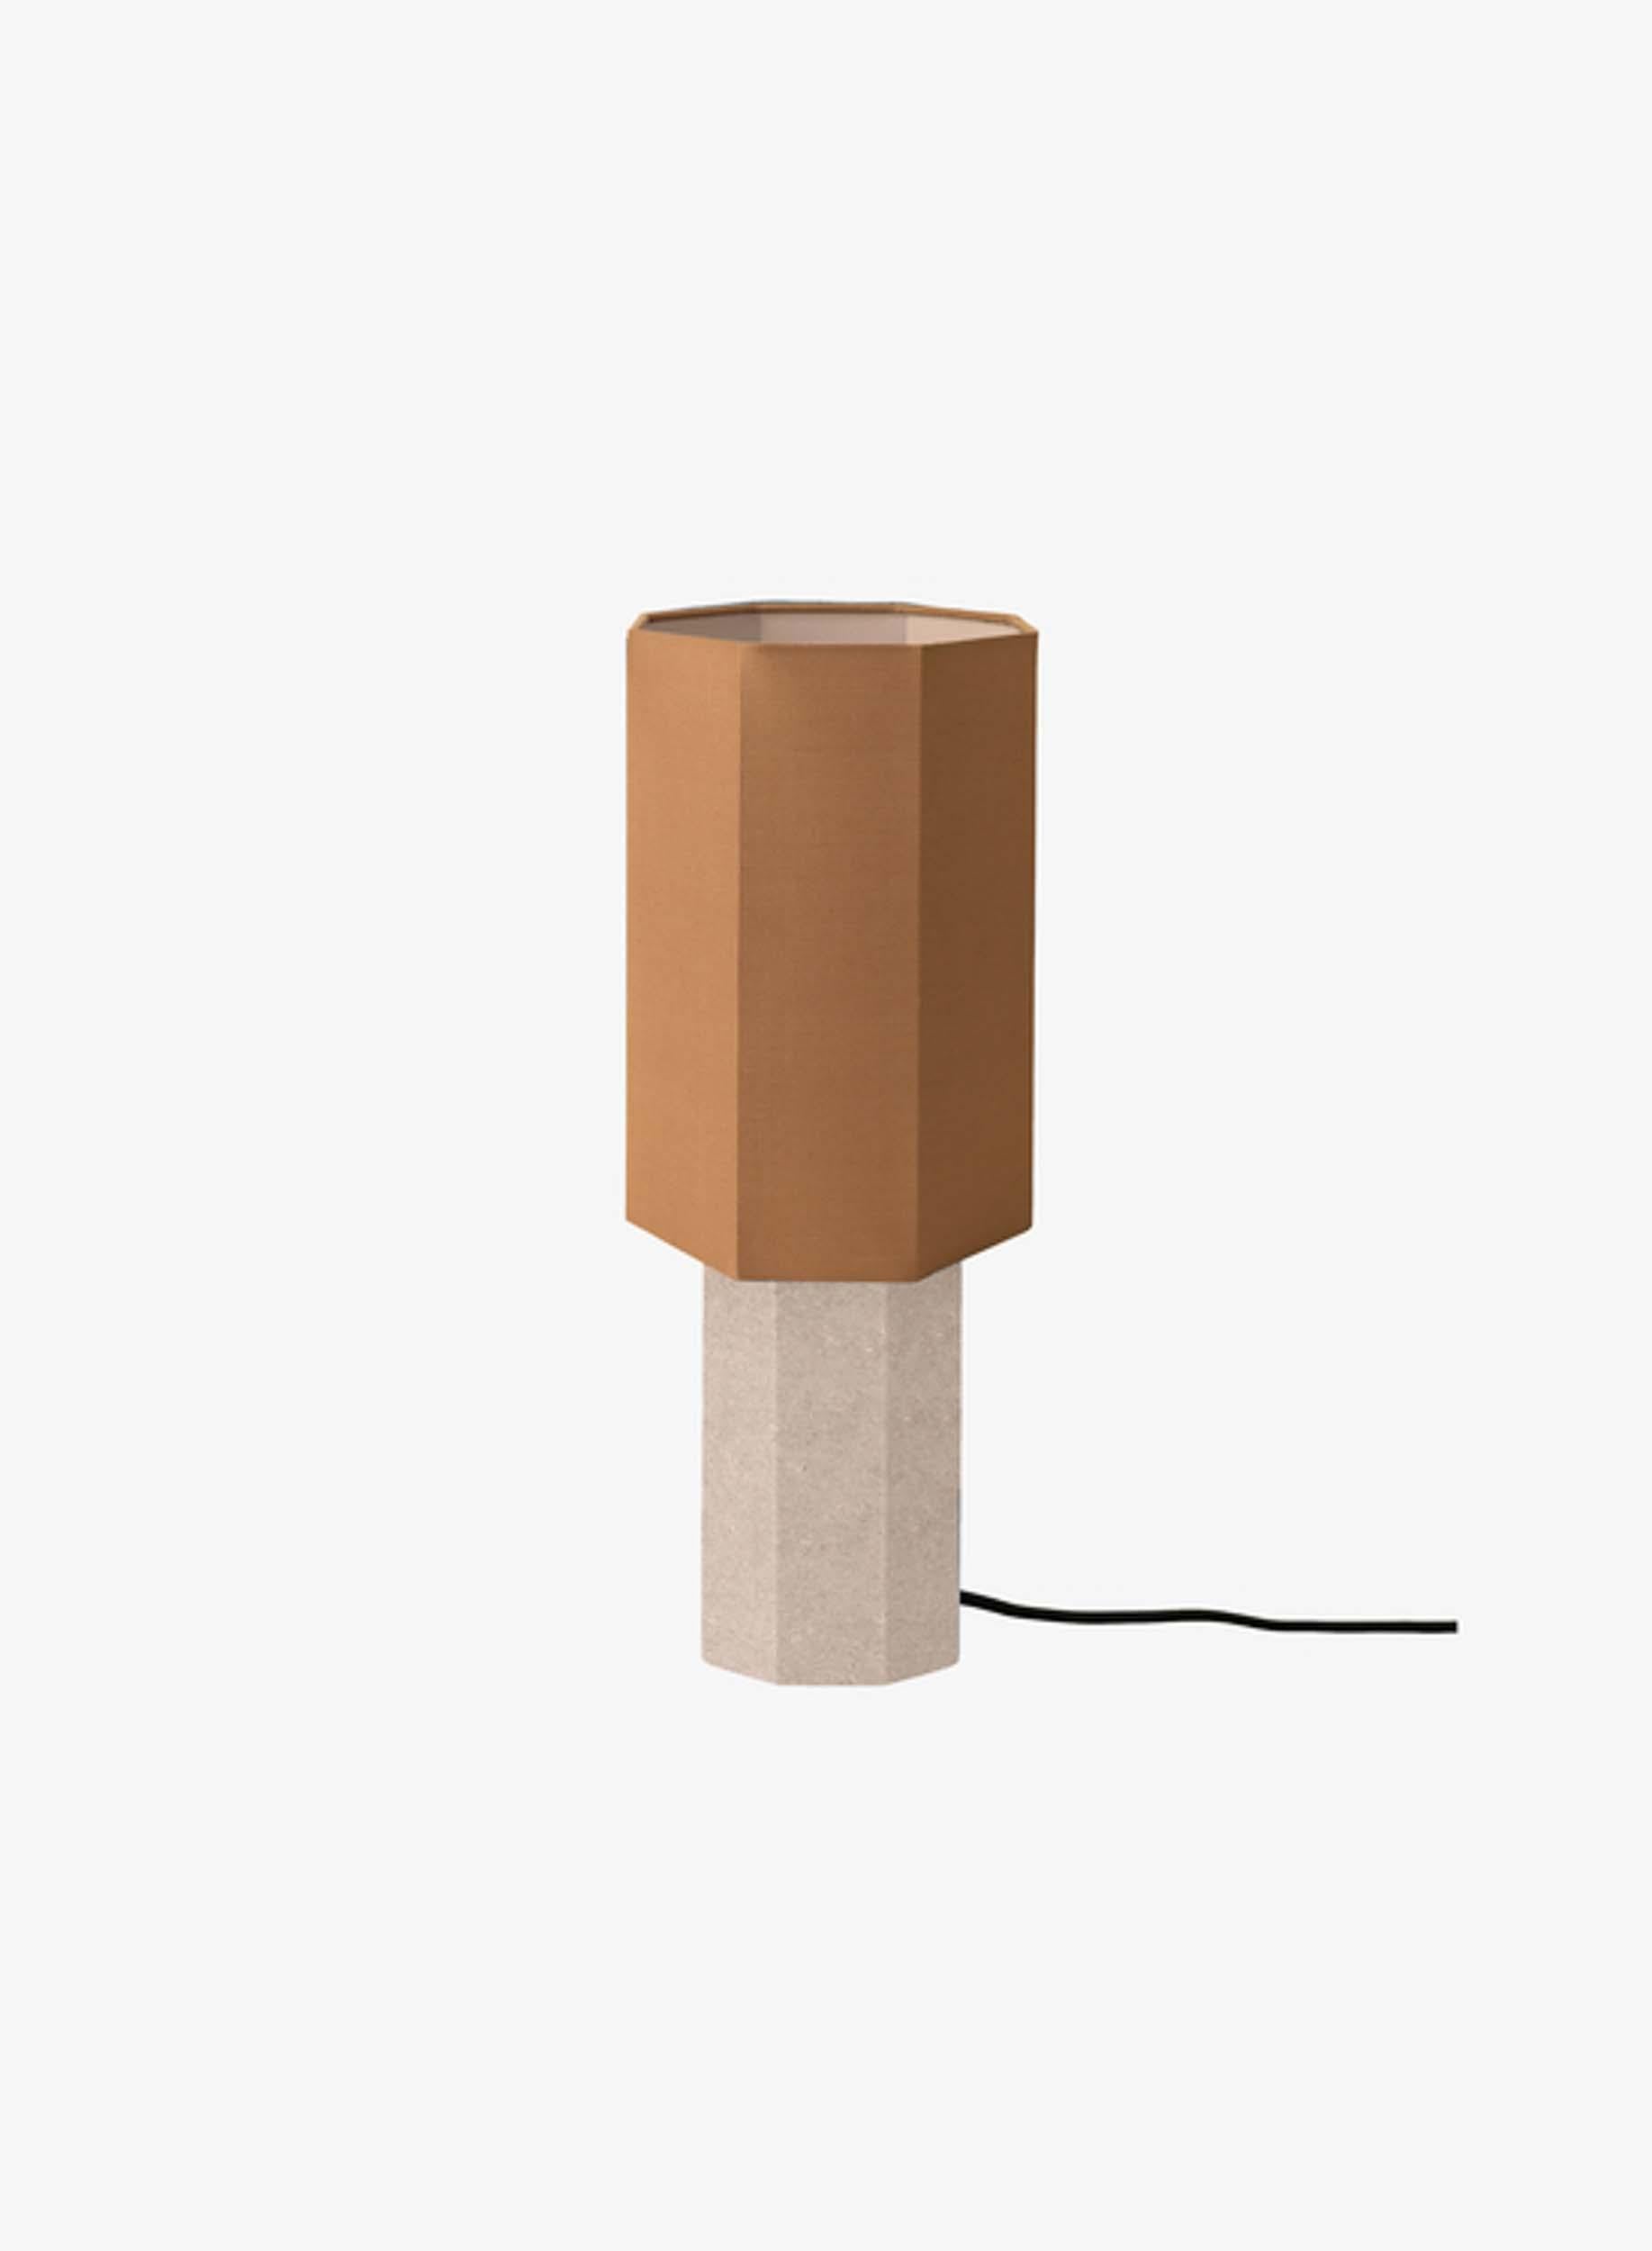 Table lamp 'The Eight over Eight' by Louise Roe 

Designed in Denmark and manufactured in Italy.

Model shown in the picture: 
Base: Travertine
Lampshade: Brass 

Dimensions : 
Height: 36 cm
Diameter: 12.5 cm

Louise Roe is a Copenhagen